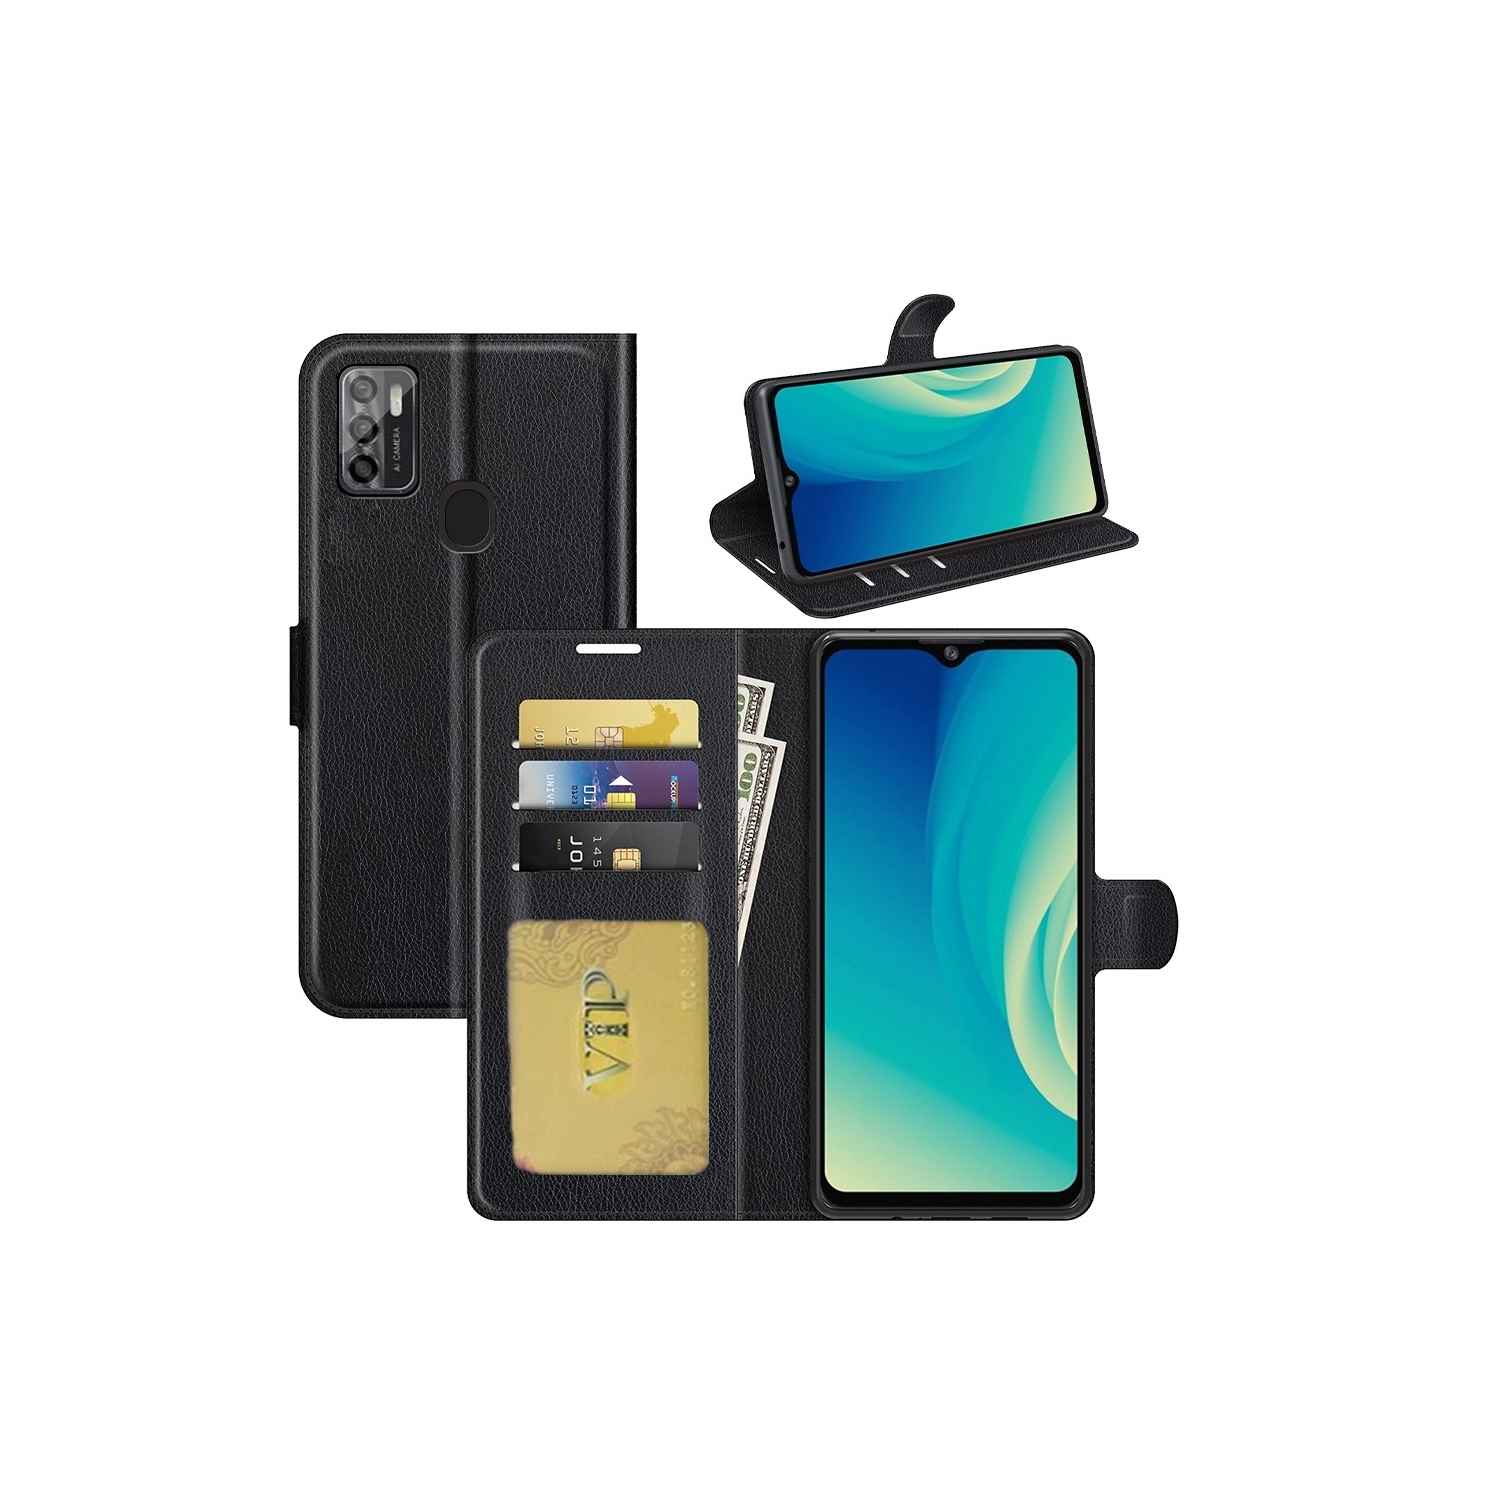 [CS] ZTE Blade A7P Case, Magnetic Leather Folio Wallet Flip Case Cover with Card Slot, Black